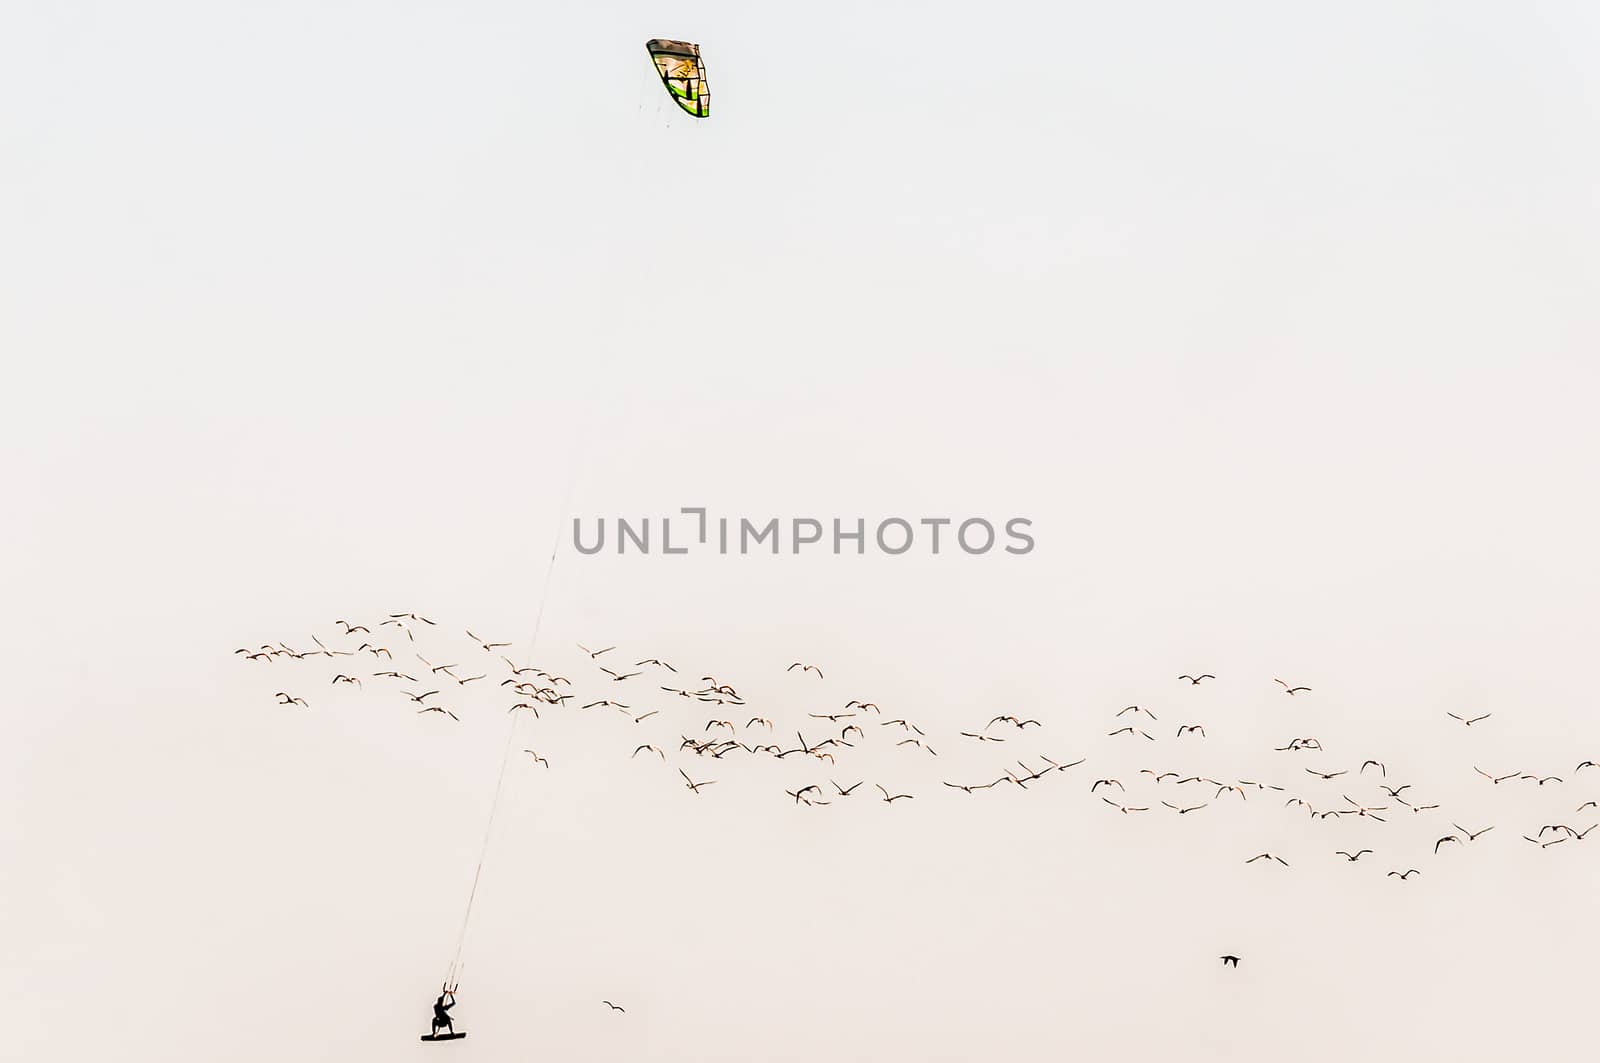 Airborne windsurfer with flamingoes in the lagoon in Walvis Bay by dpreezg